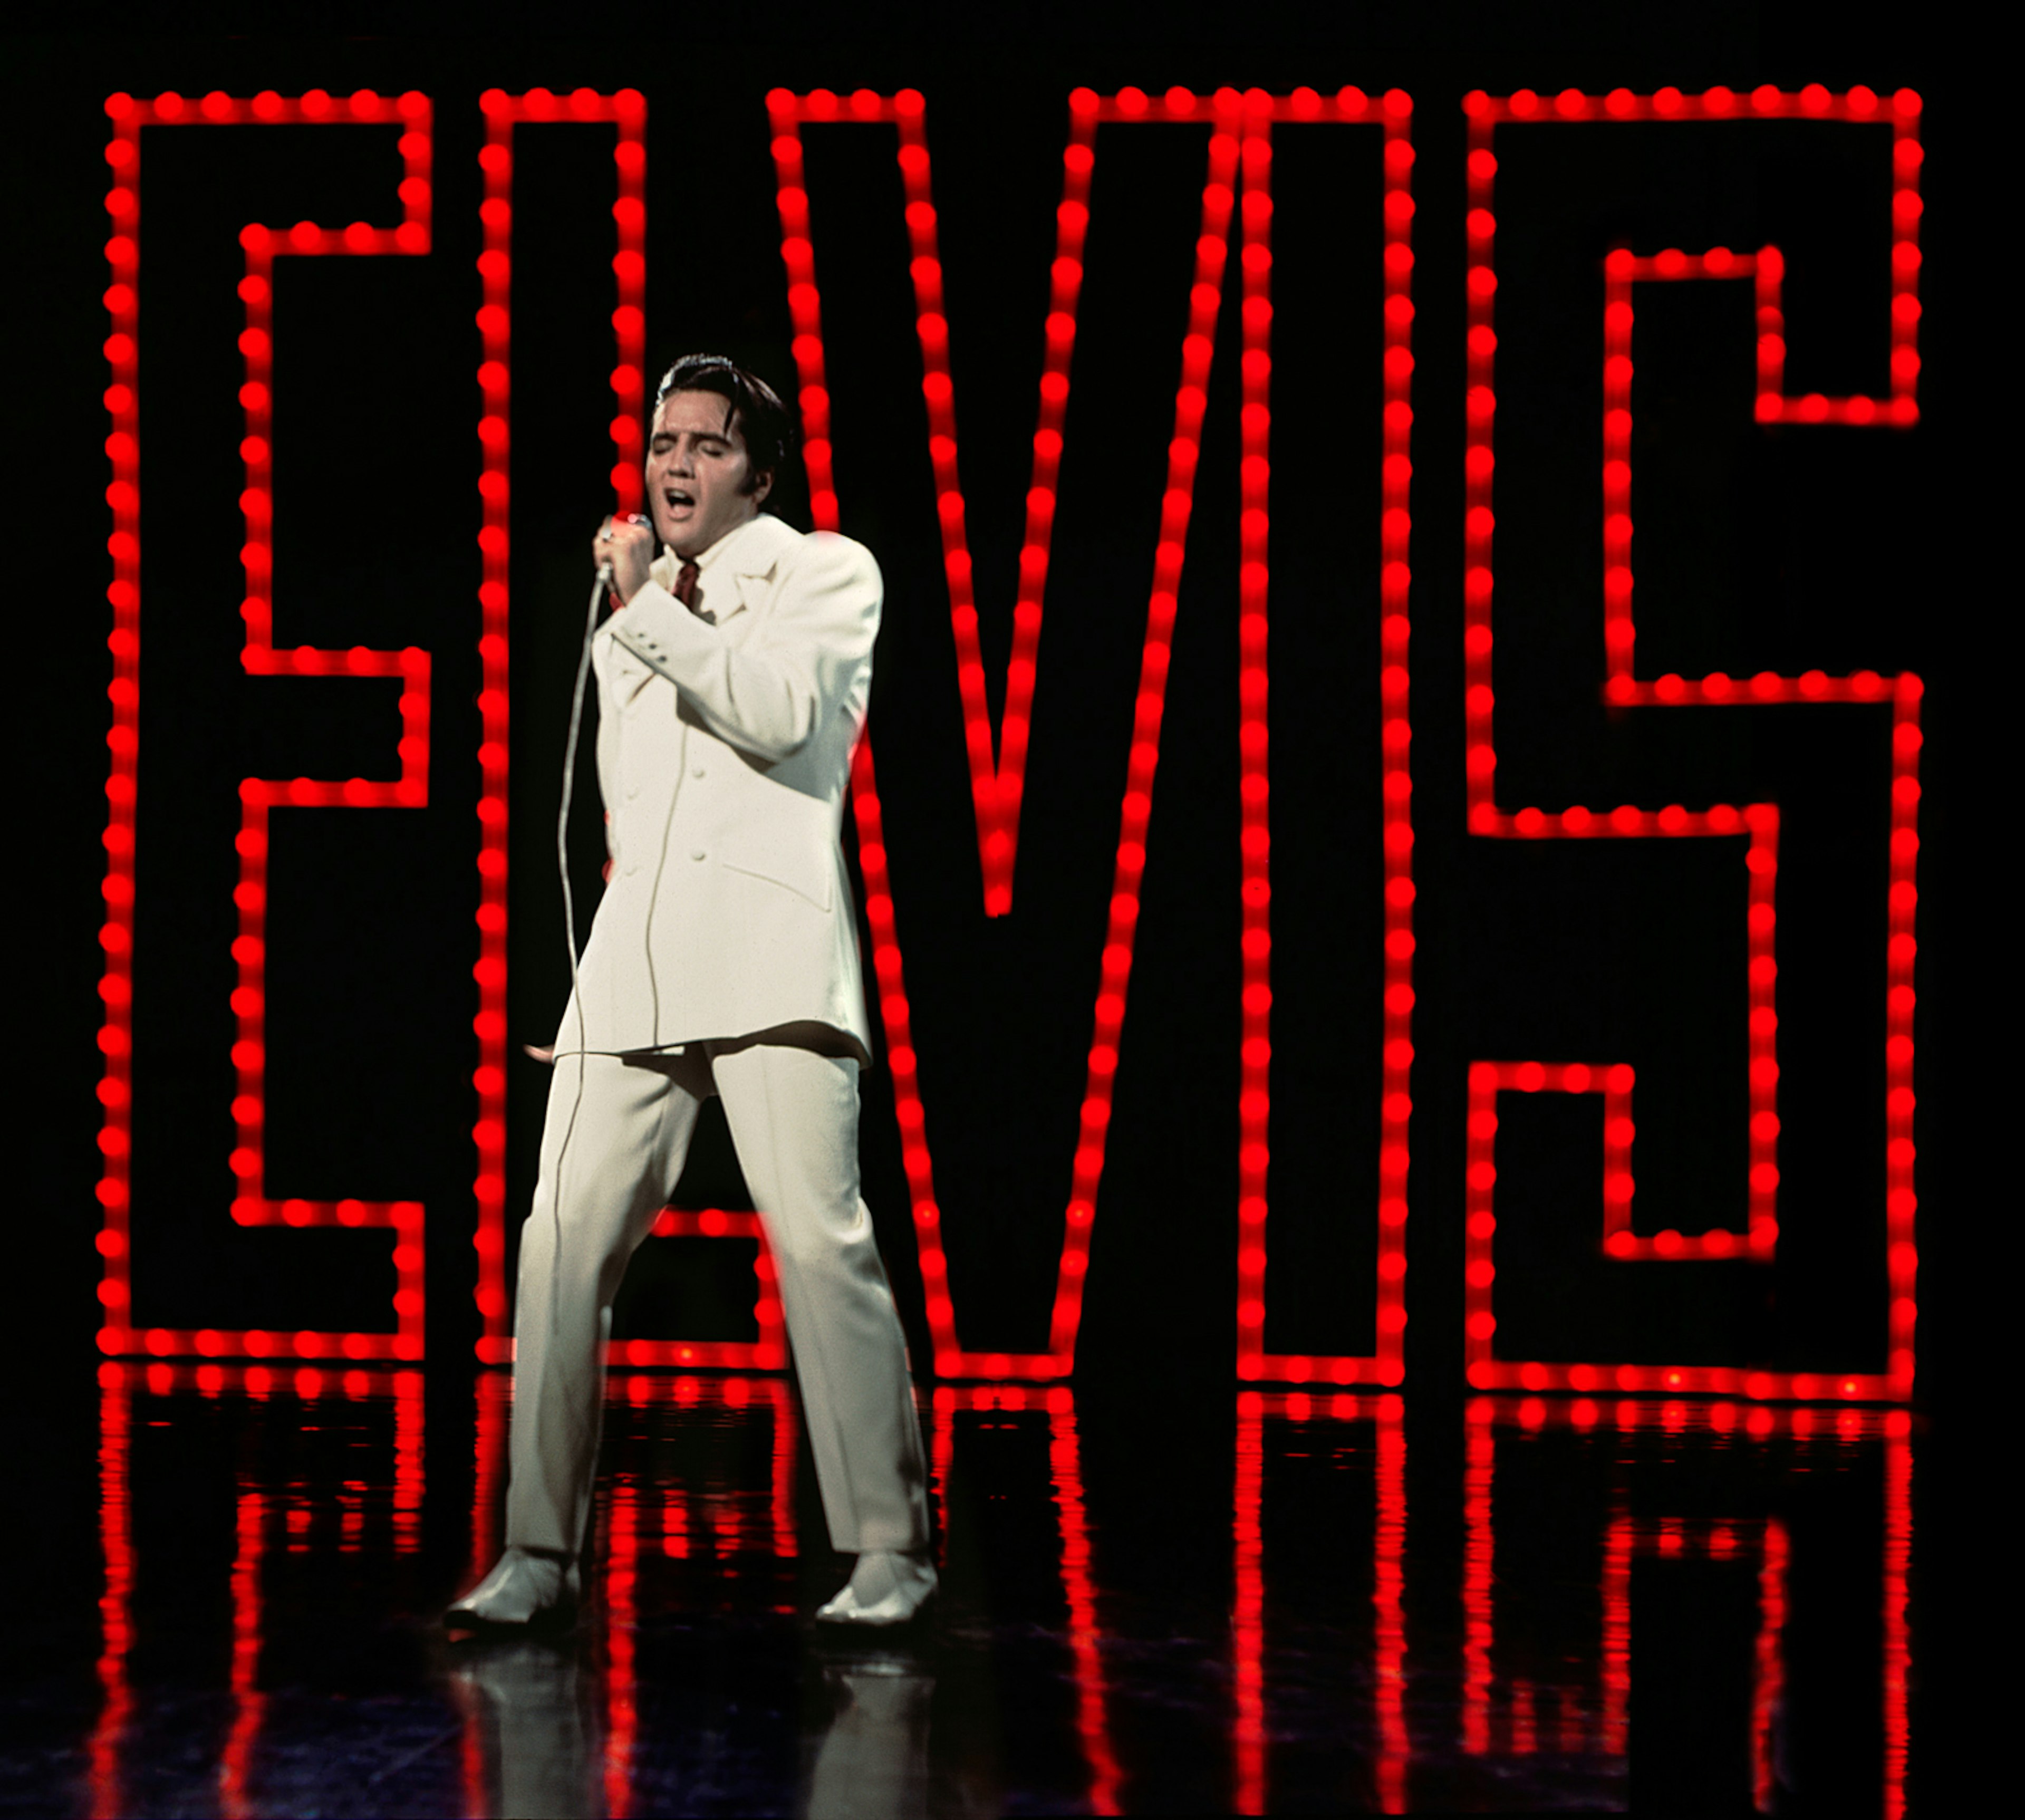 Elvlis Presley in a white suit on stage, in front of a series of red lights that spell ELVIS